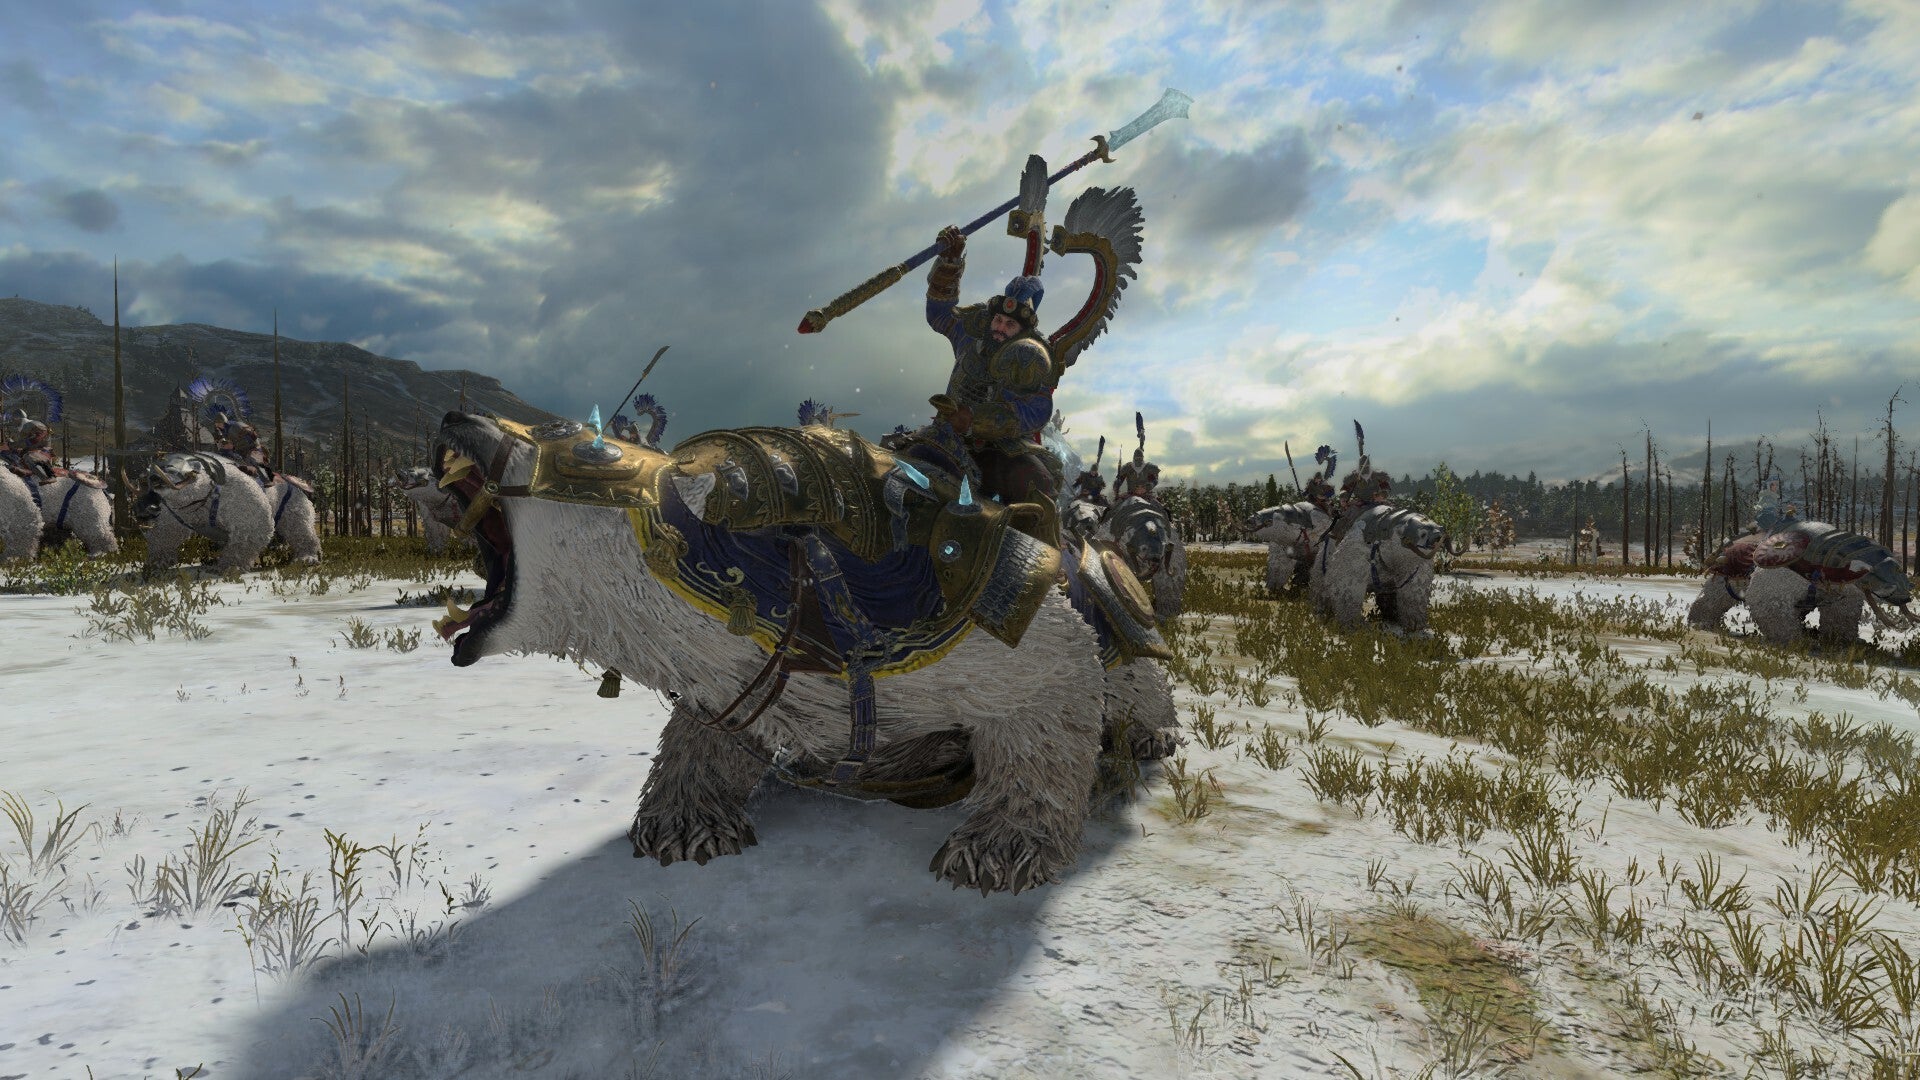 Boris Ursus, a powerful anti-large duelist on his special bear mount in Total War: Warhammer 3.